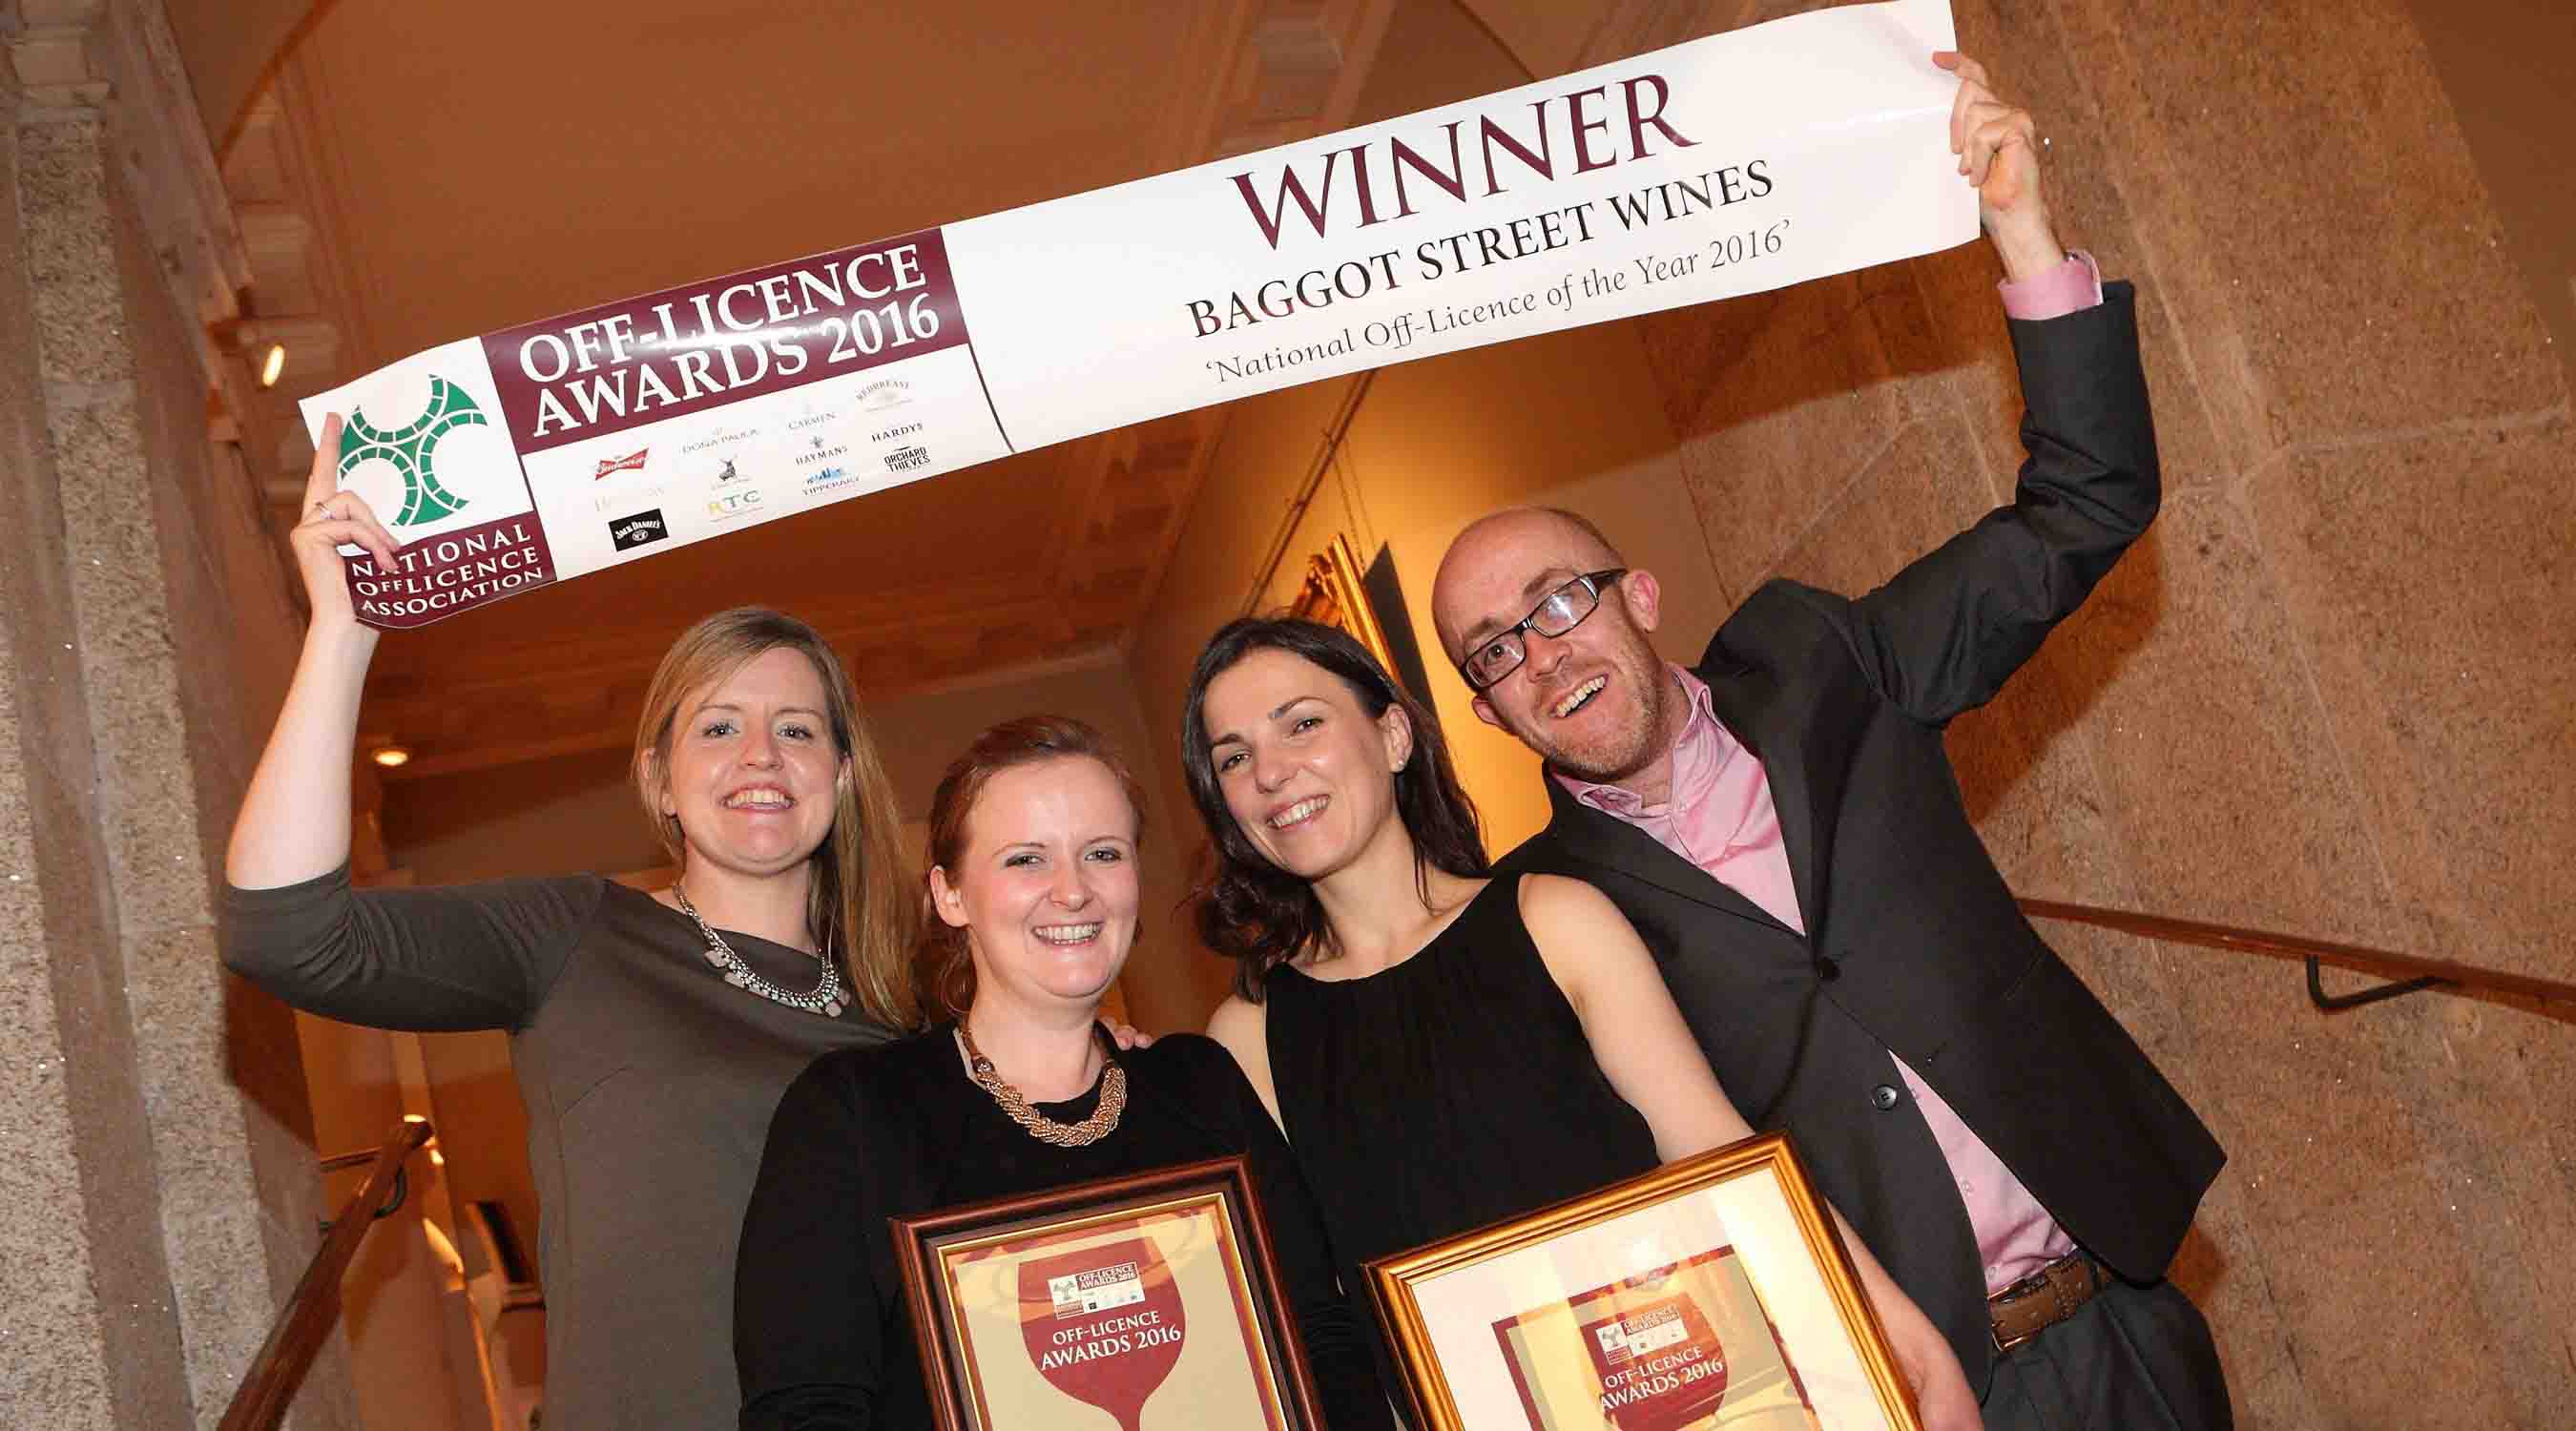 Baggot Street Winners (from left): Catherine Noakes, Alison Noone, Aga Niemiec and Garret Connolly of Baggot Street Wines who picked up the Award for Best Off-Licence in Ireland 2016 at the NOffLA awards at the Kings’ Inns in Dublin.